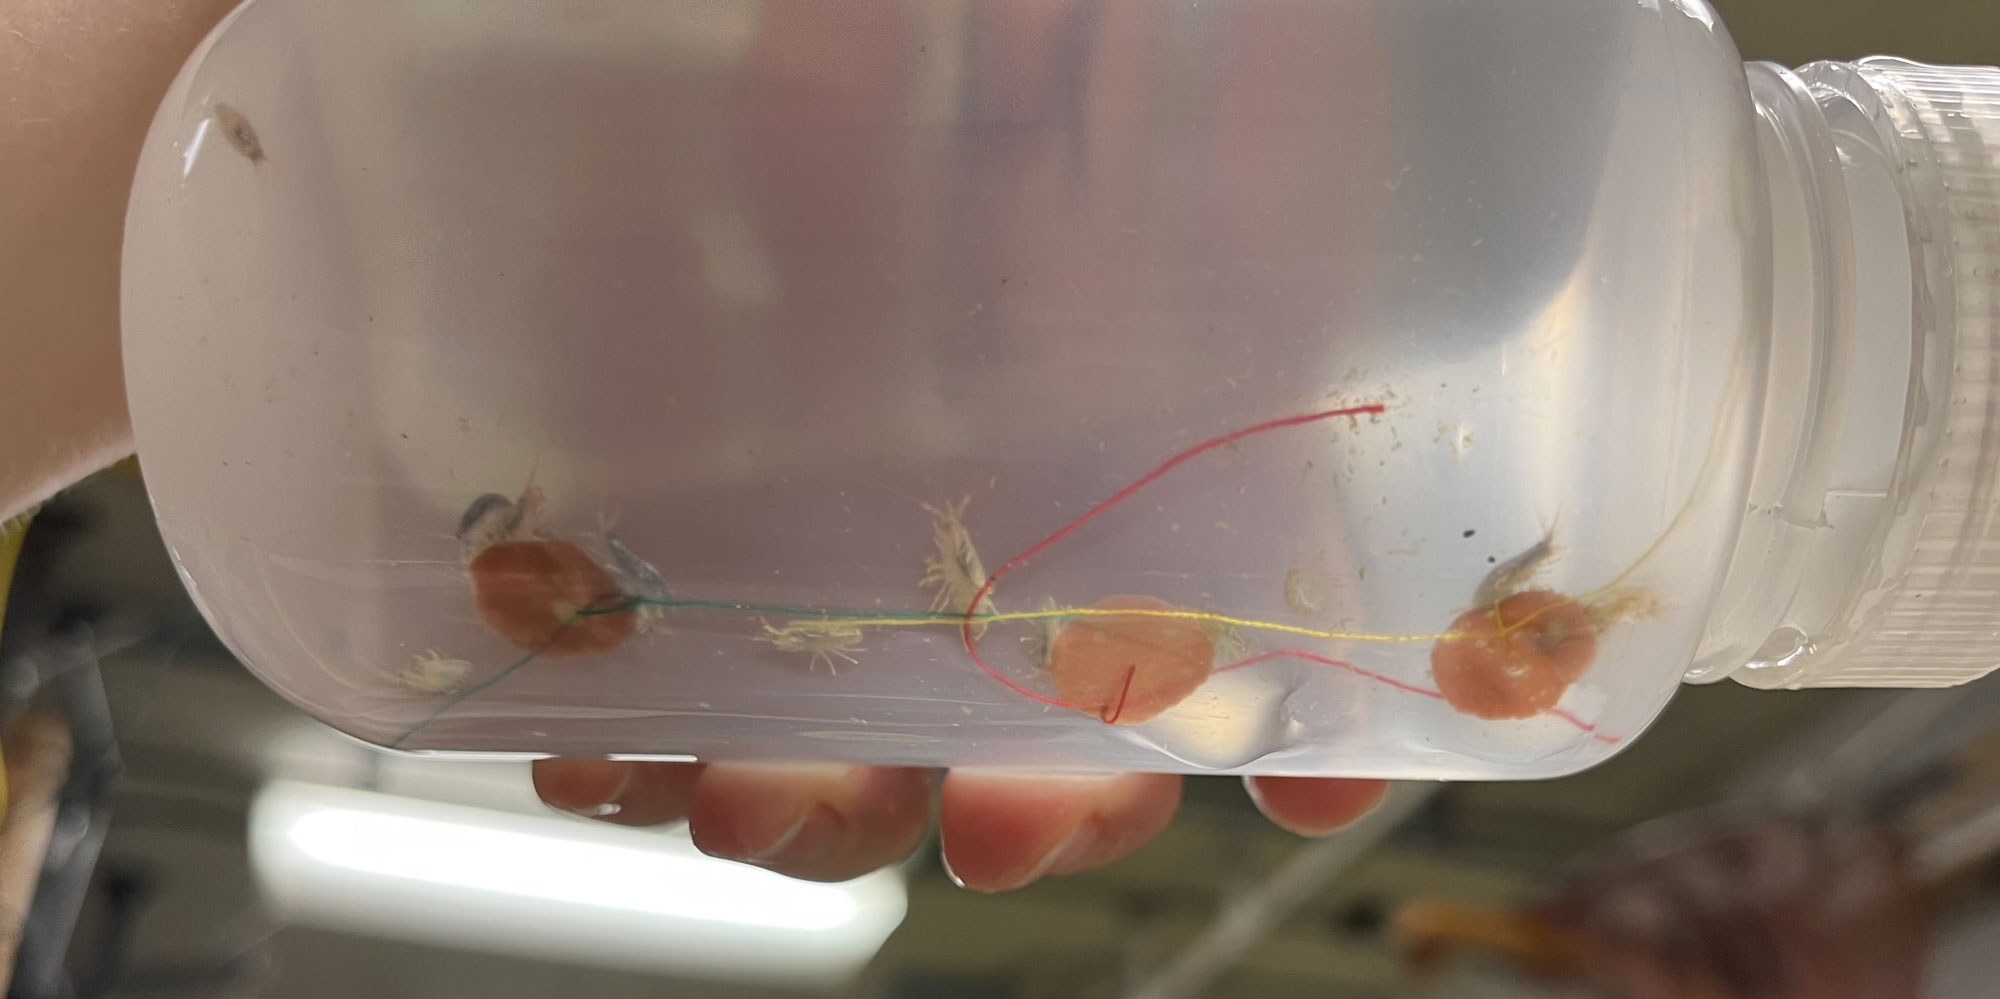 Close up of a translucent bottle in which tan colored amphipods swim amongst red discs with green, yellow or red threads attached